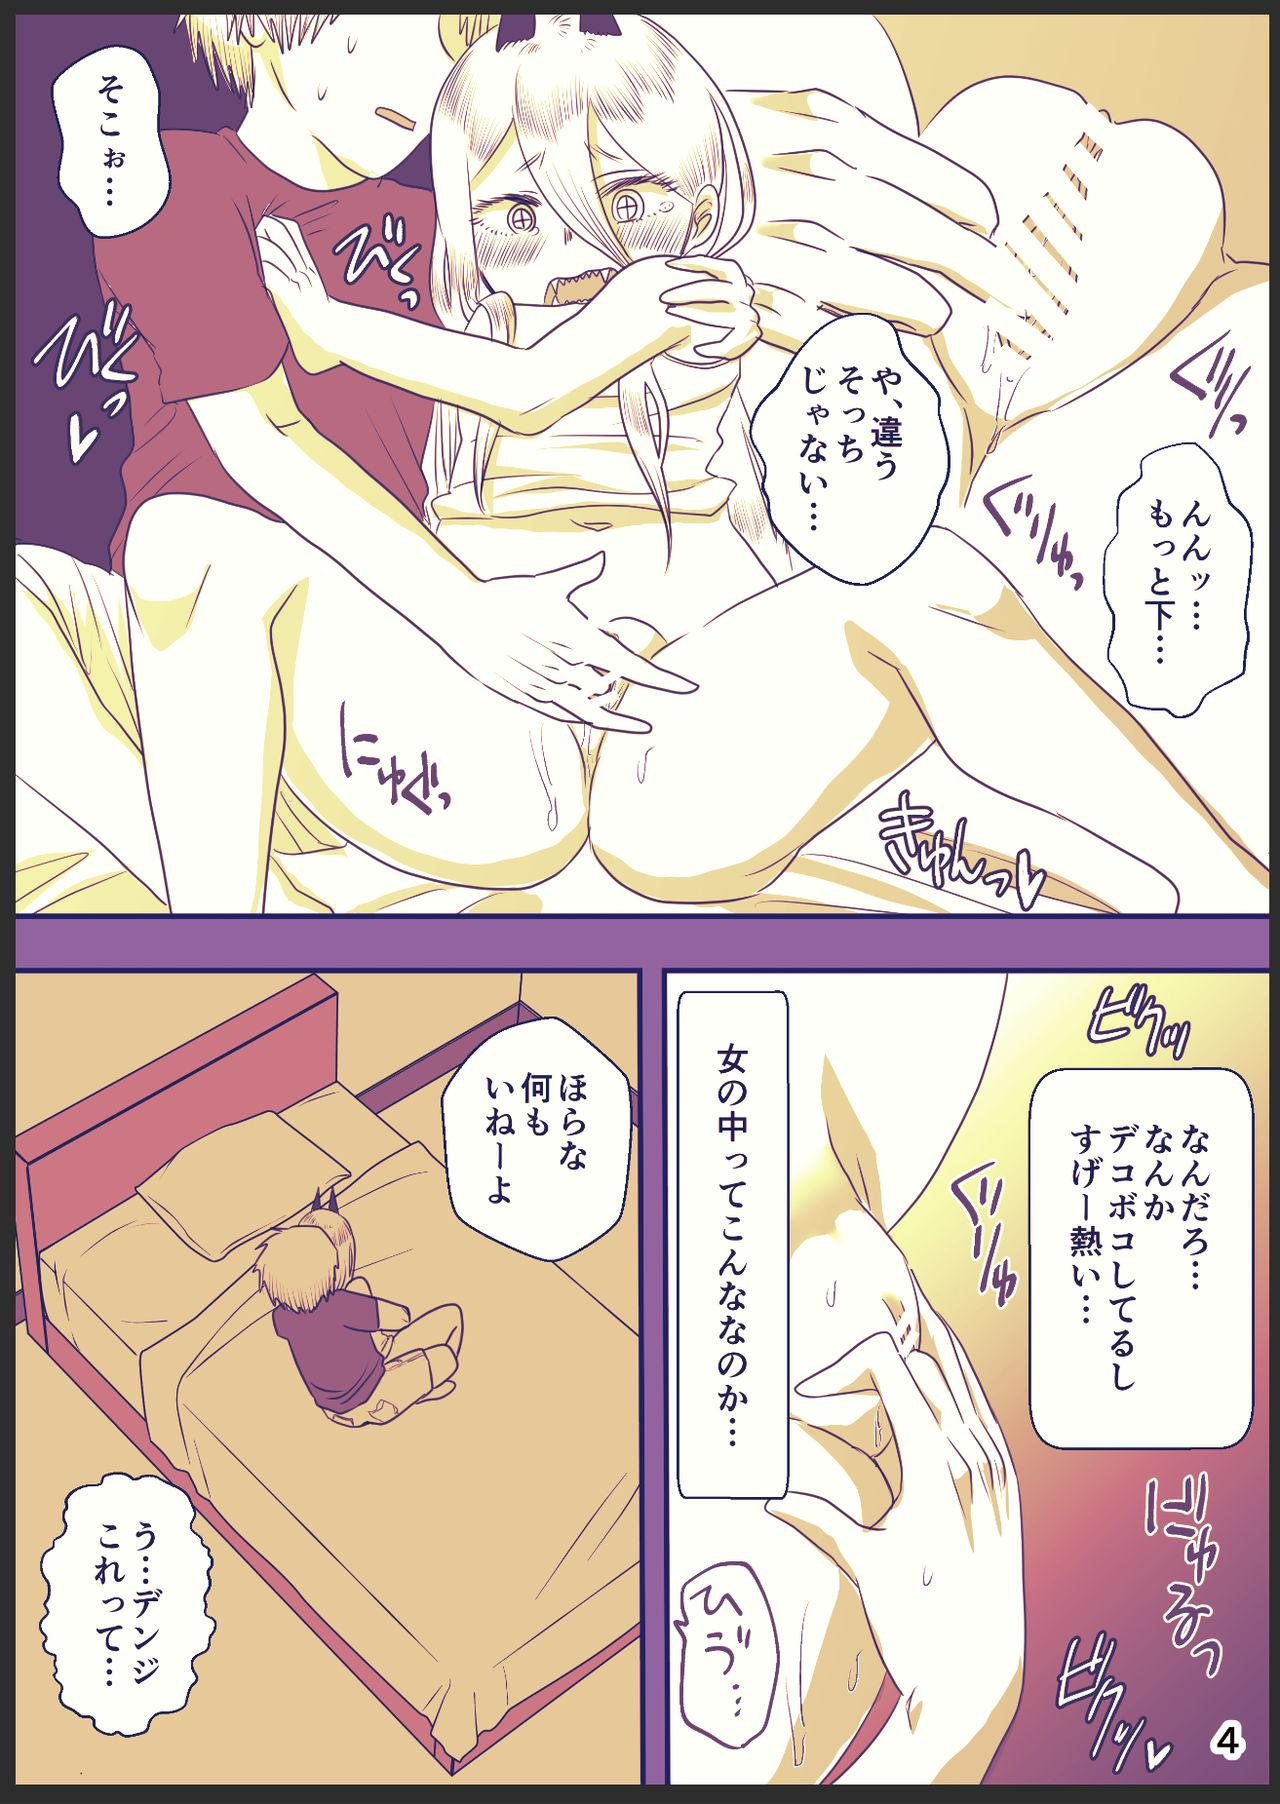 Price 71話のデンパワ漫画 - Chainsaw man Topless - Page 4